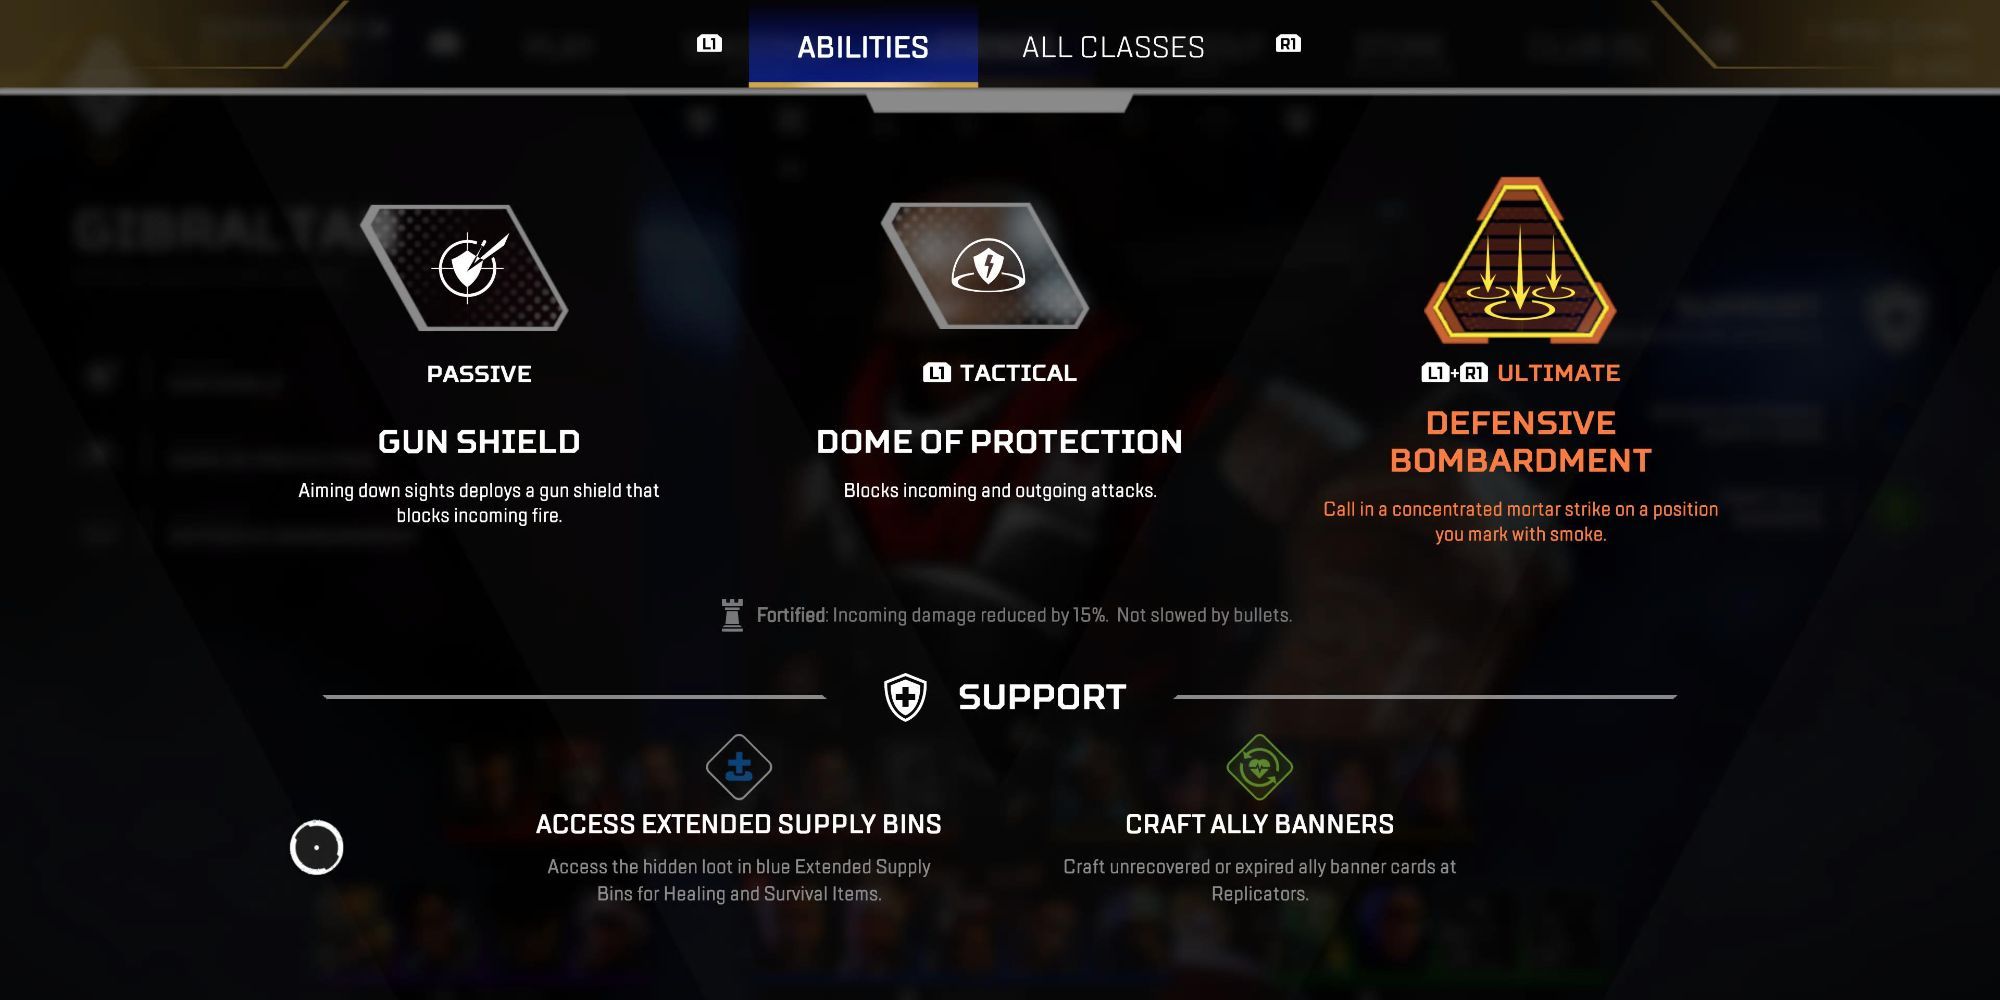 Legend menu showing Gibraltar's abilities and class perks as a Support in Apex Legends